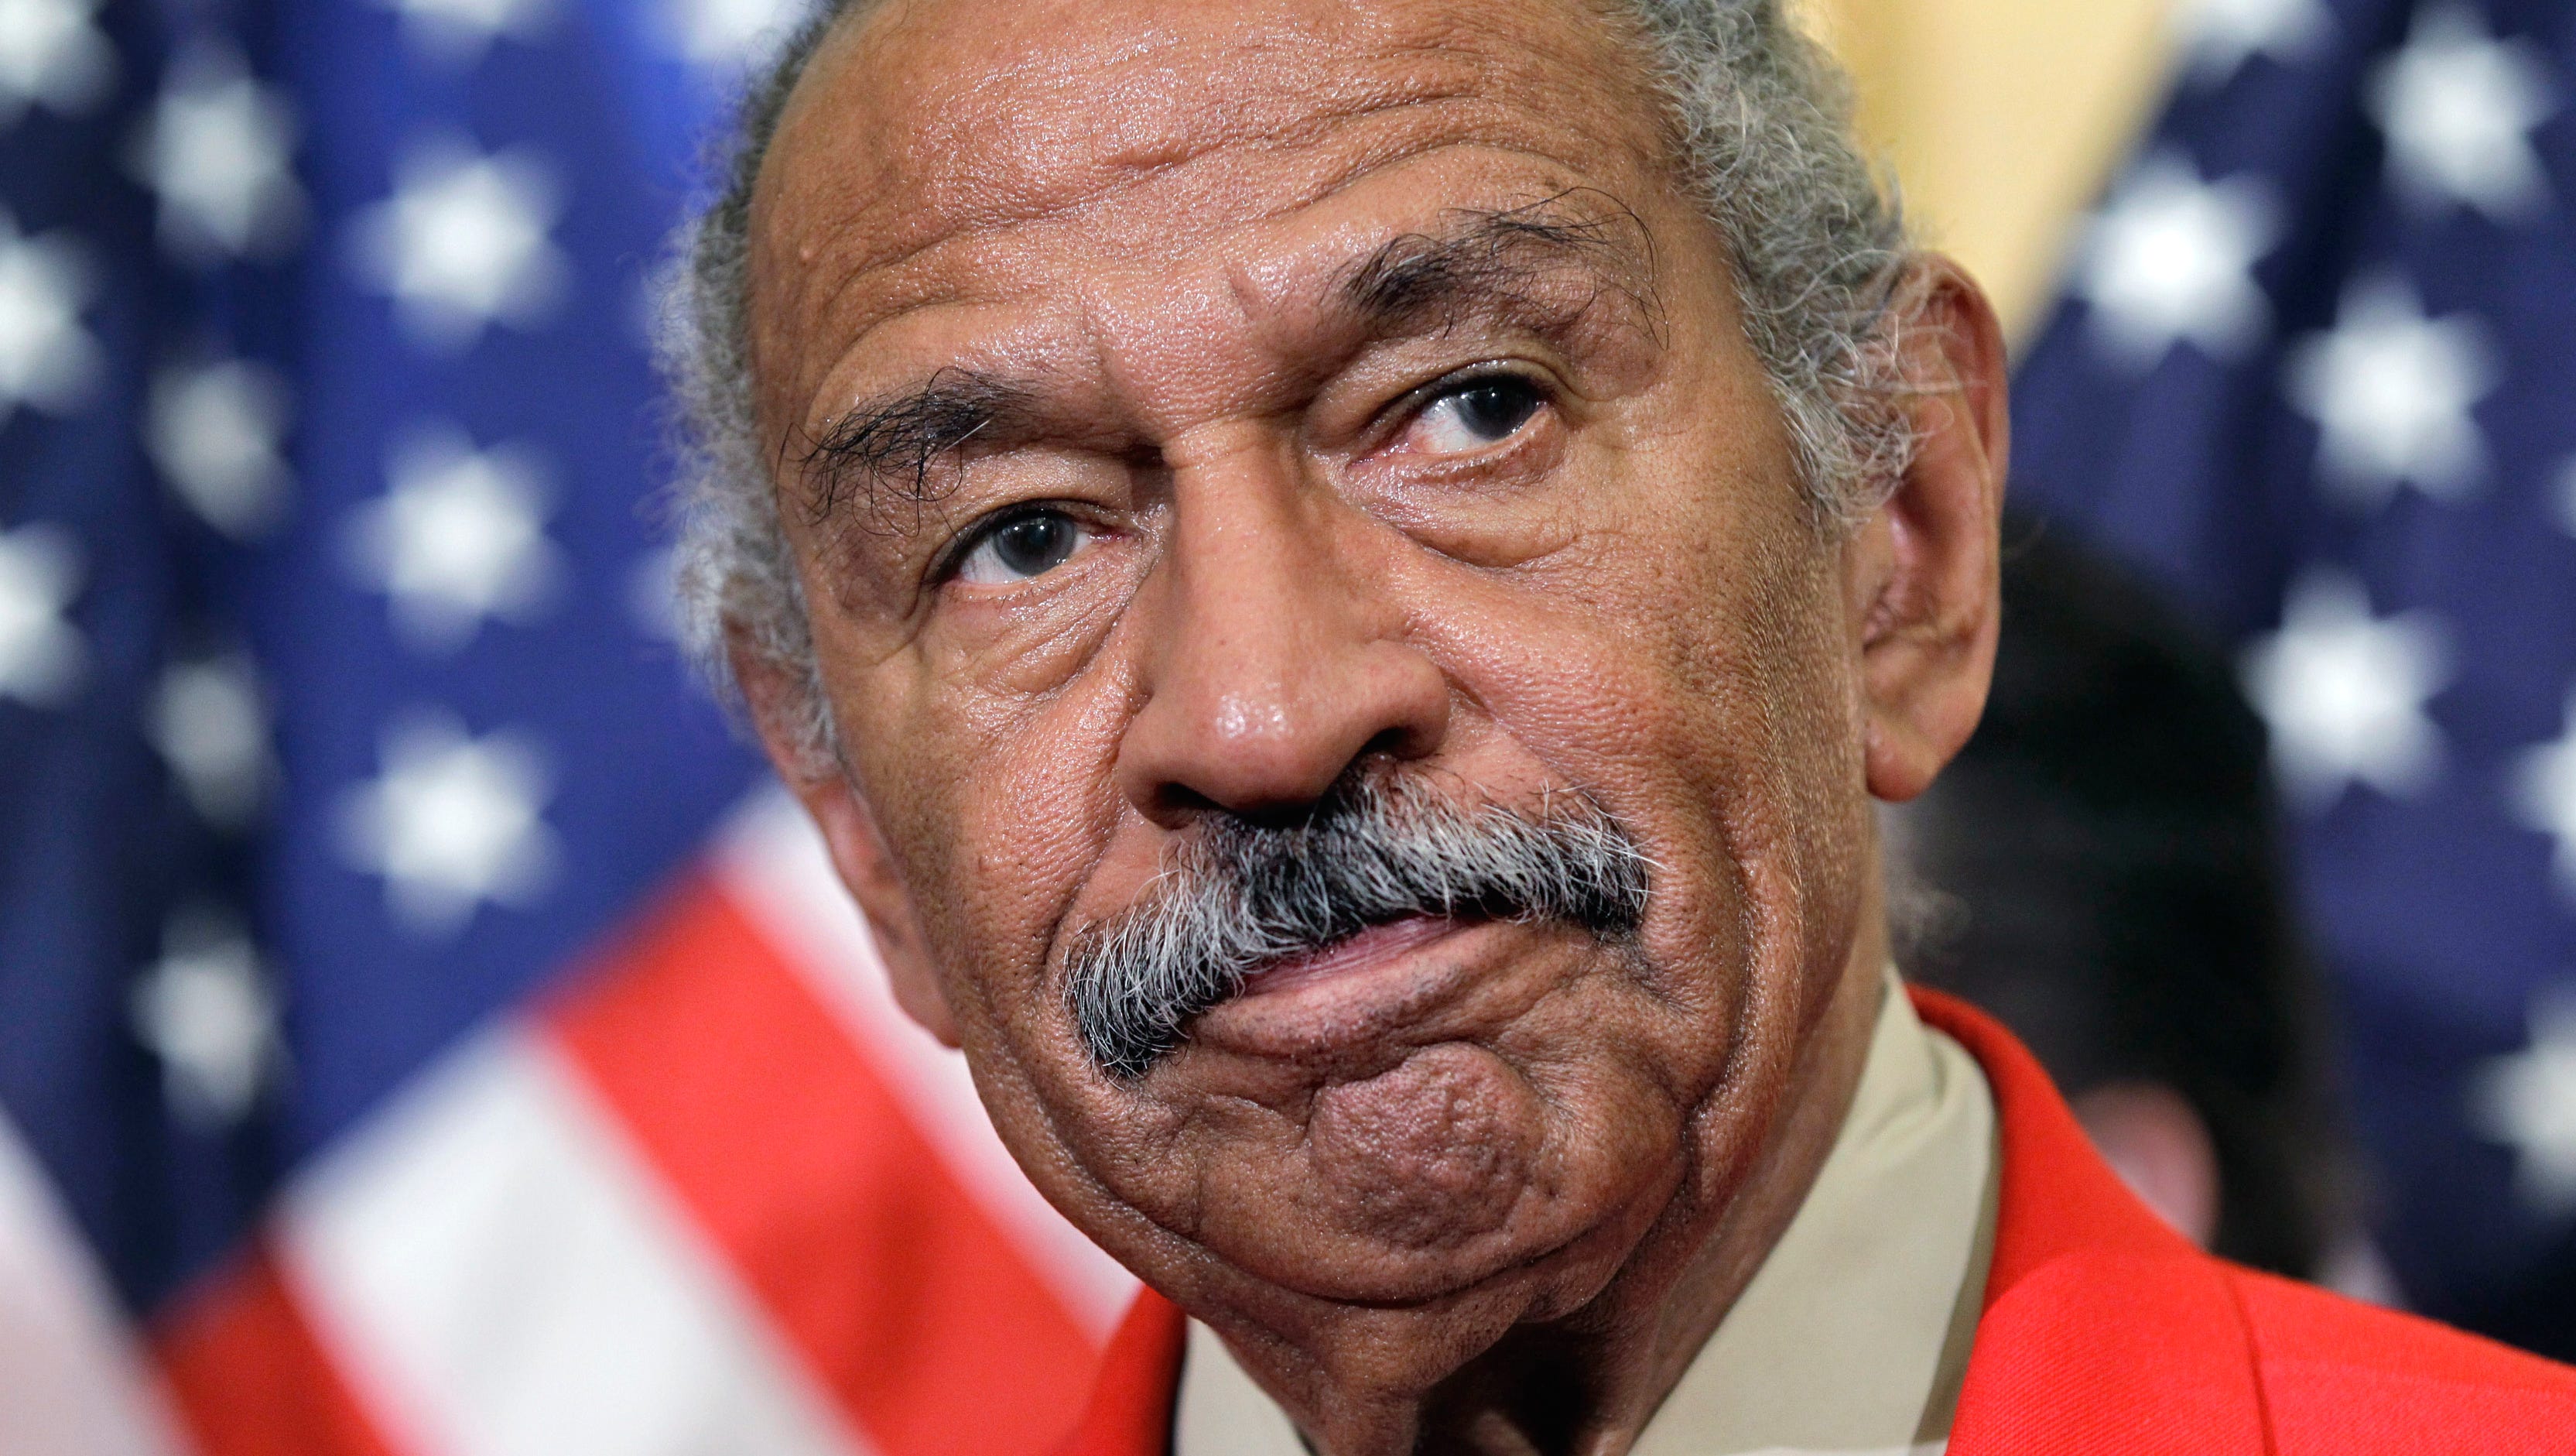 Conyers listens during a news conference on Capitol Hill in 2011 to discuss efforts to thwart the harm done to the economy by online vendors dealing in counterfeit goods or copyright infringement.